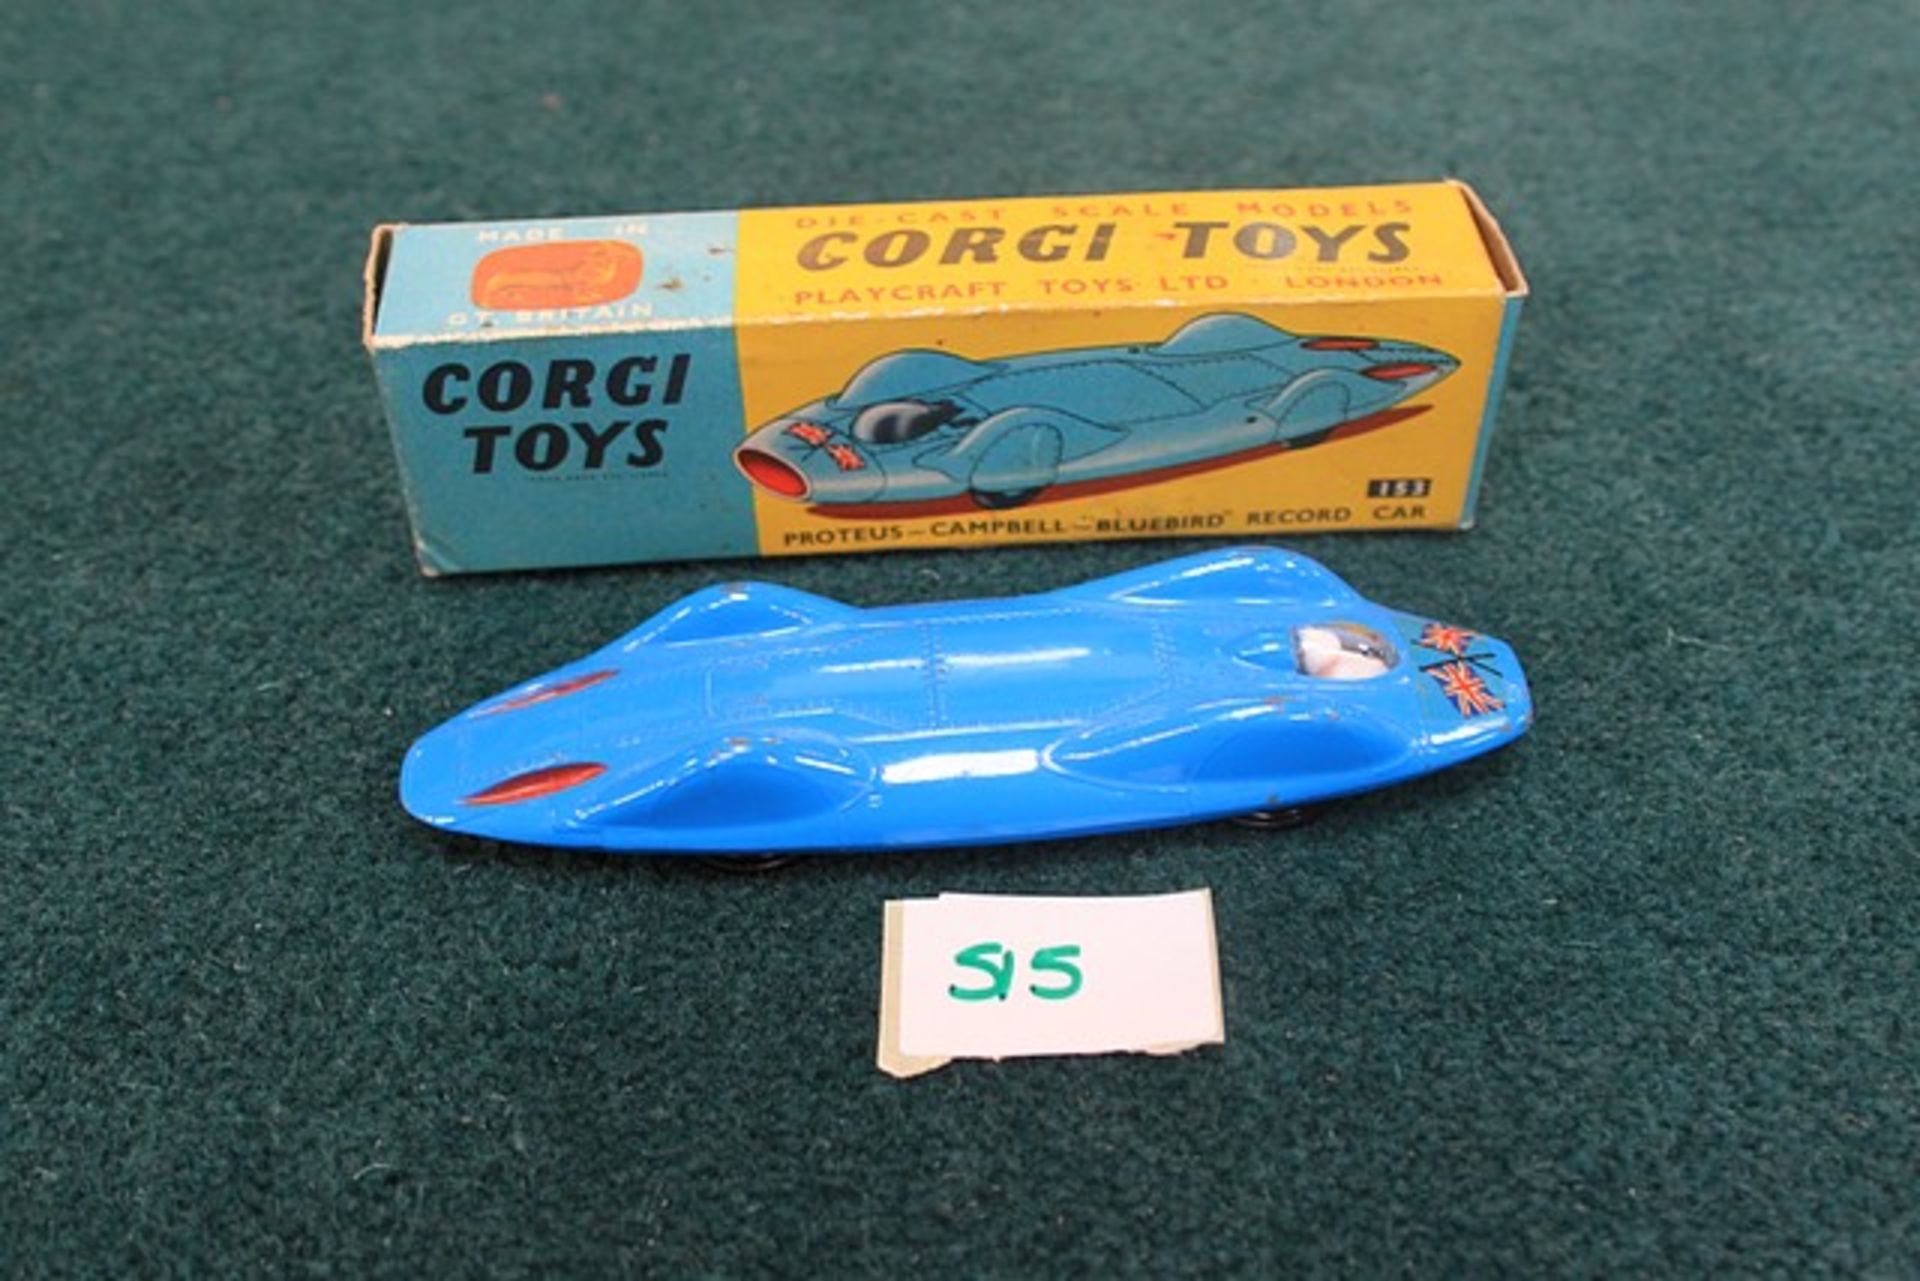 Corgi #153 Diecast Proteus - Campbell - Bluebird Record Car Complete With Box - Image 2 of 2